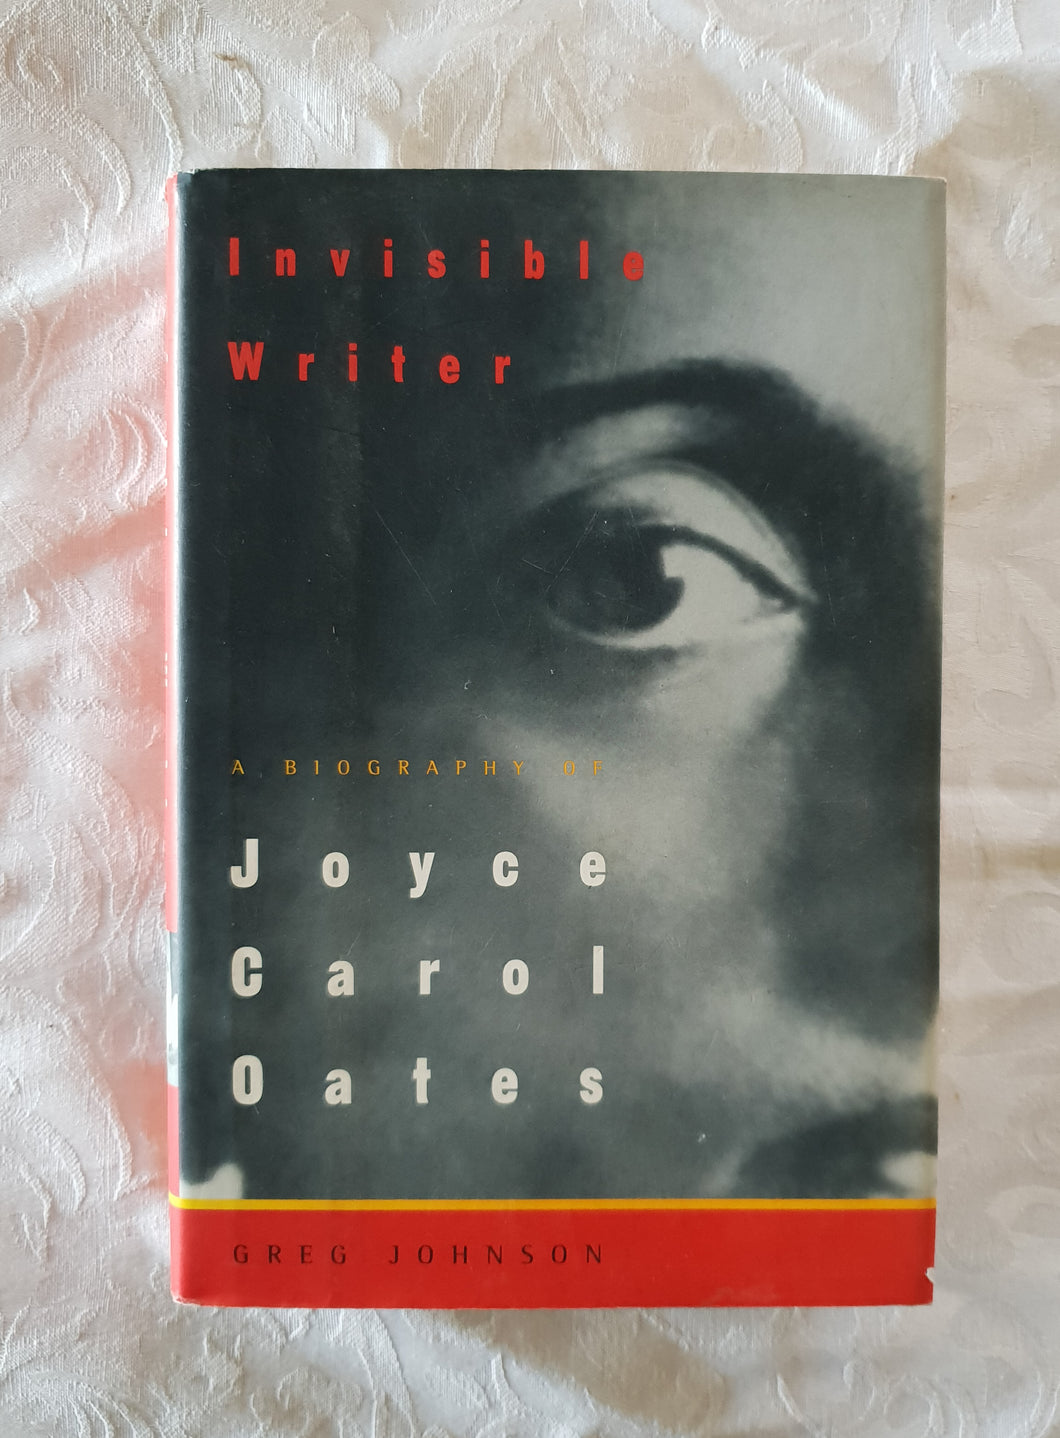 Invisible Writer: A Biography of Joyce Carol Oates by Greg Johnson